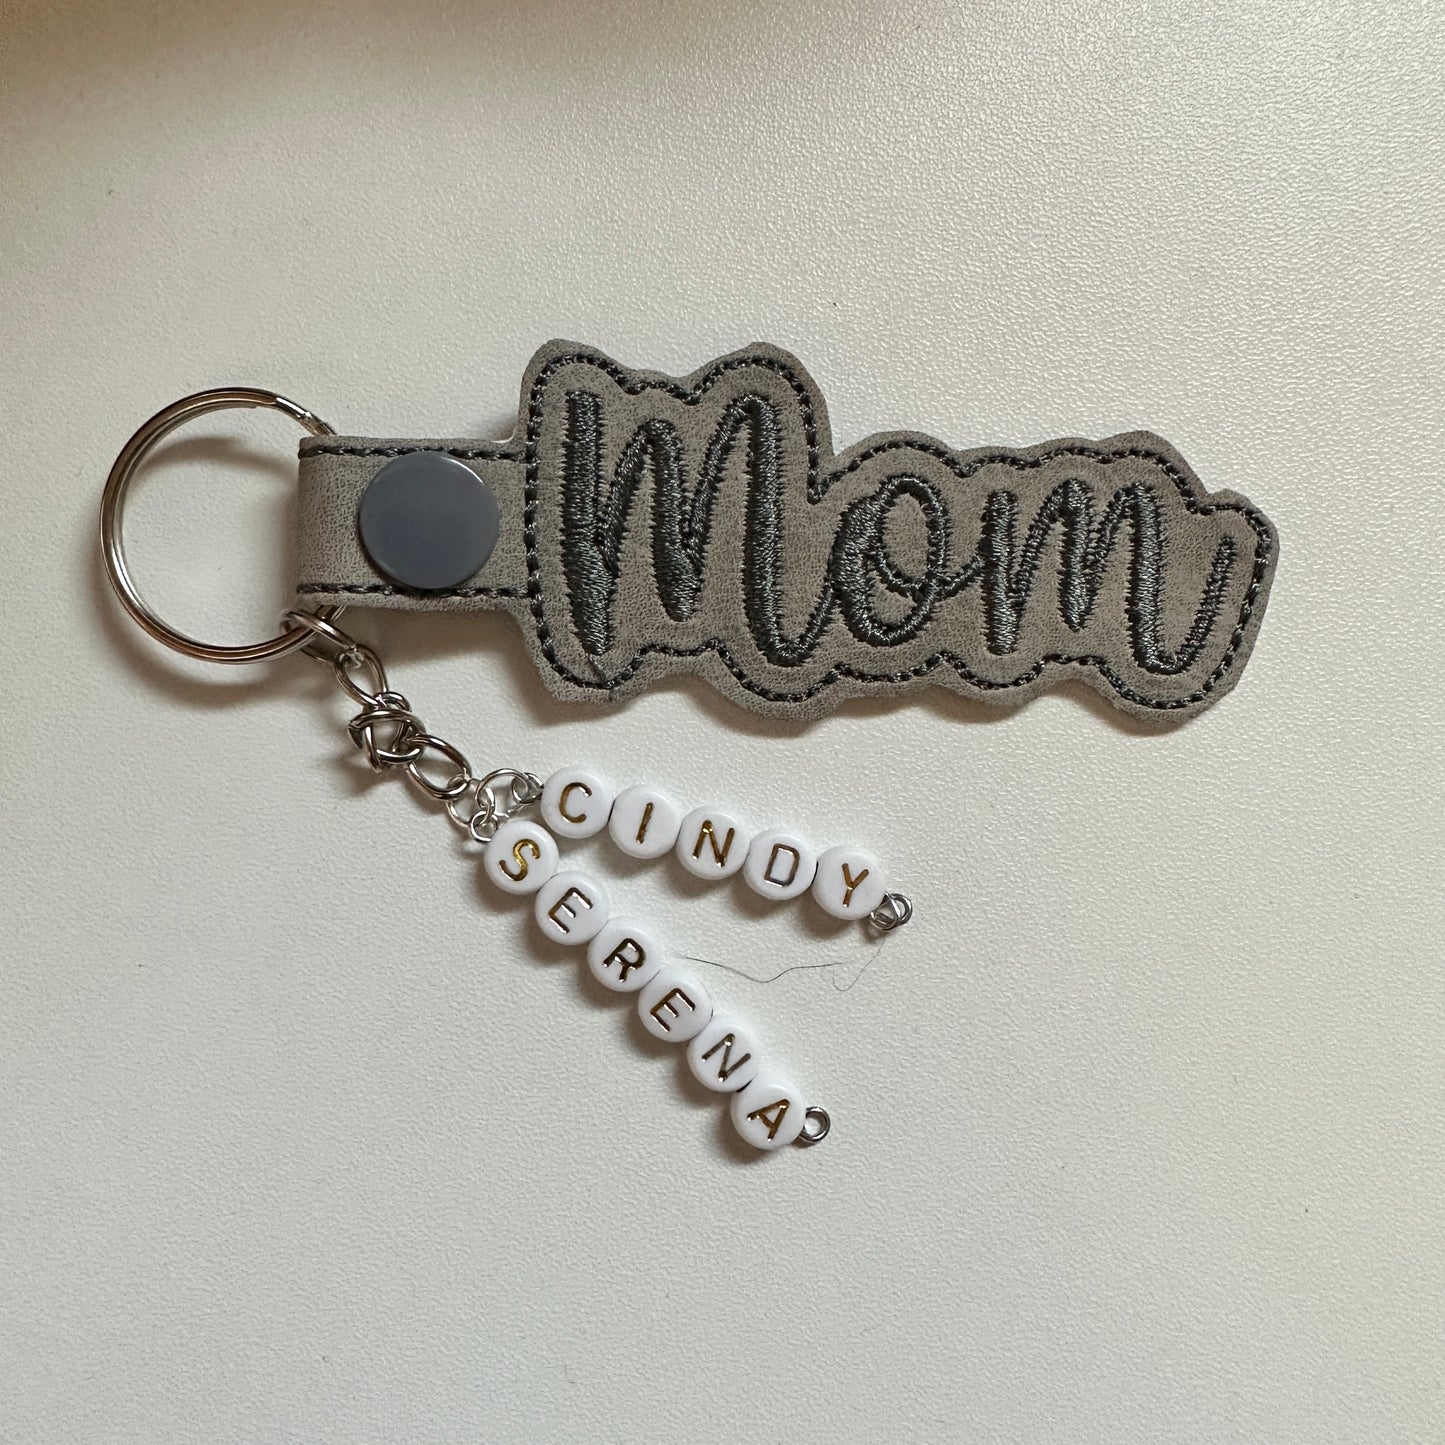 Mom embroidered keychain